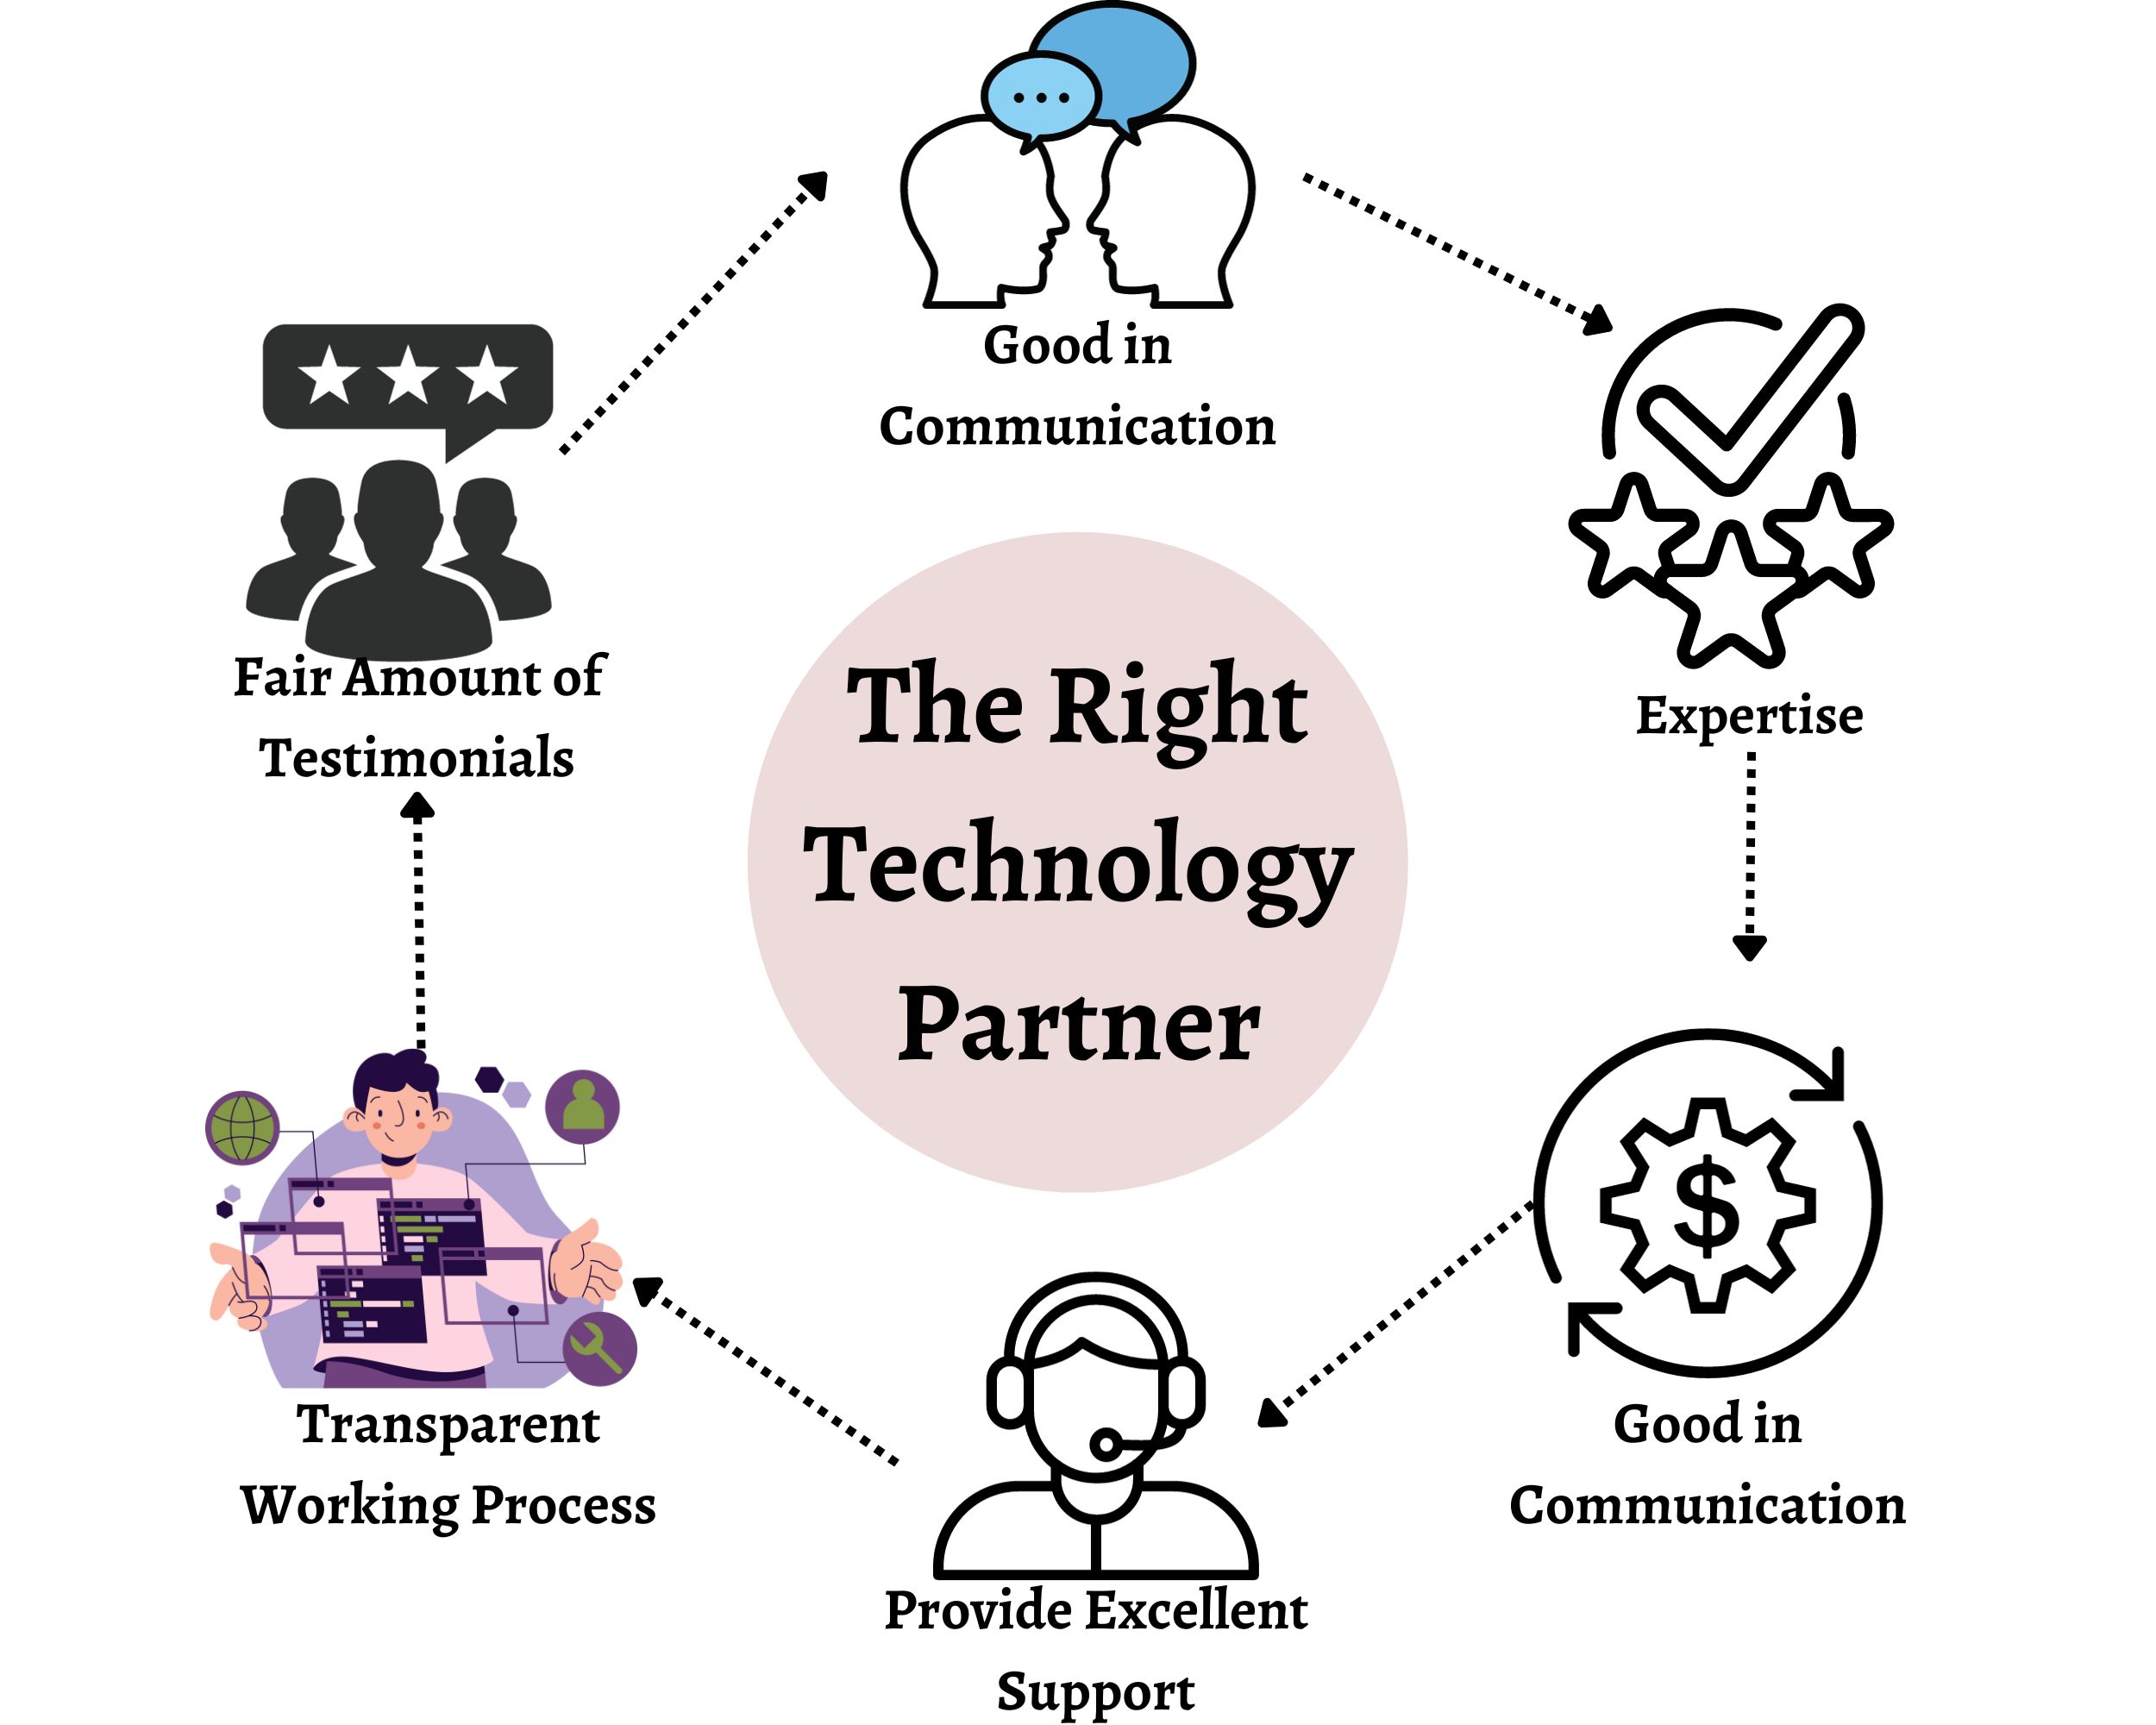 The Right Technology Partner